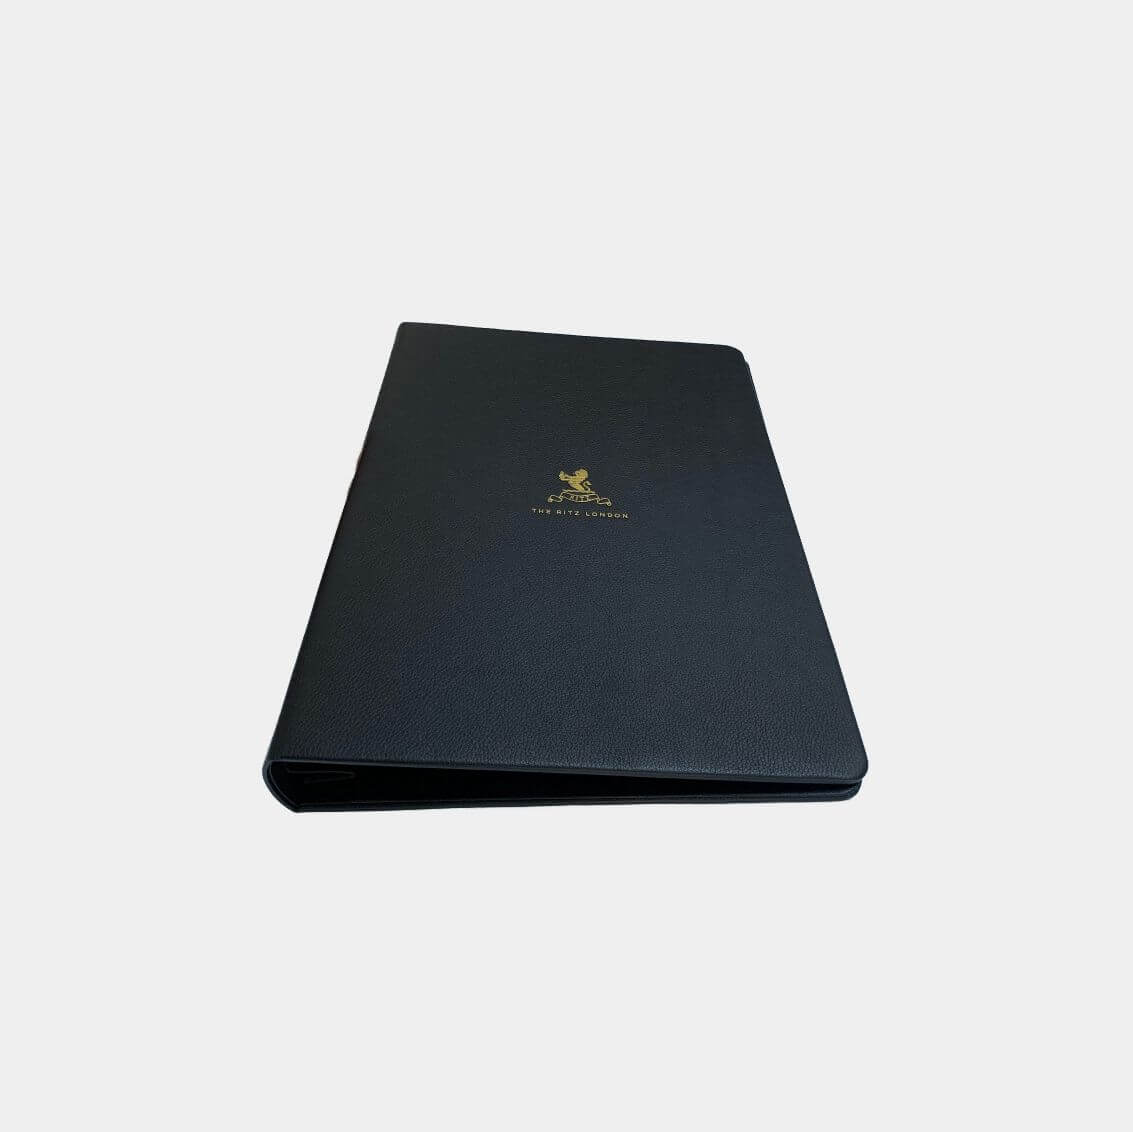 A4 leather wine list cover made to accommodate a large wine menu